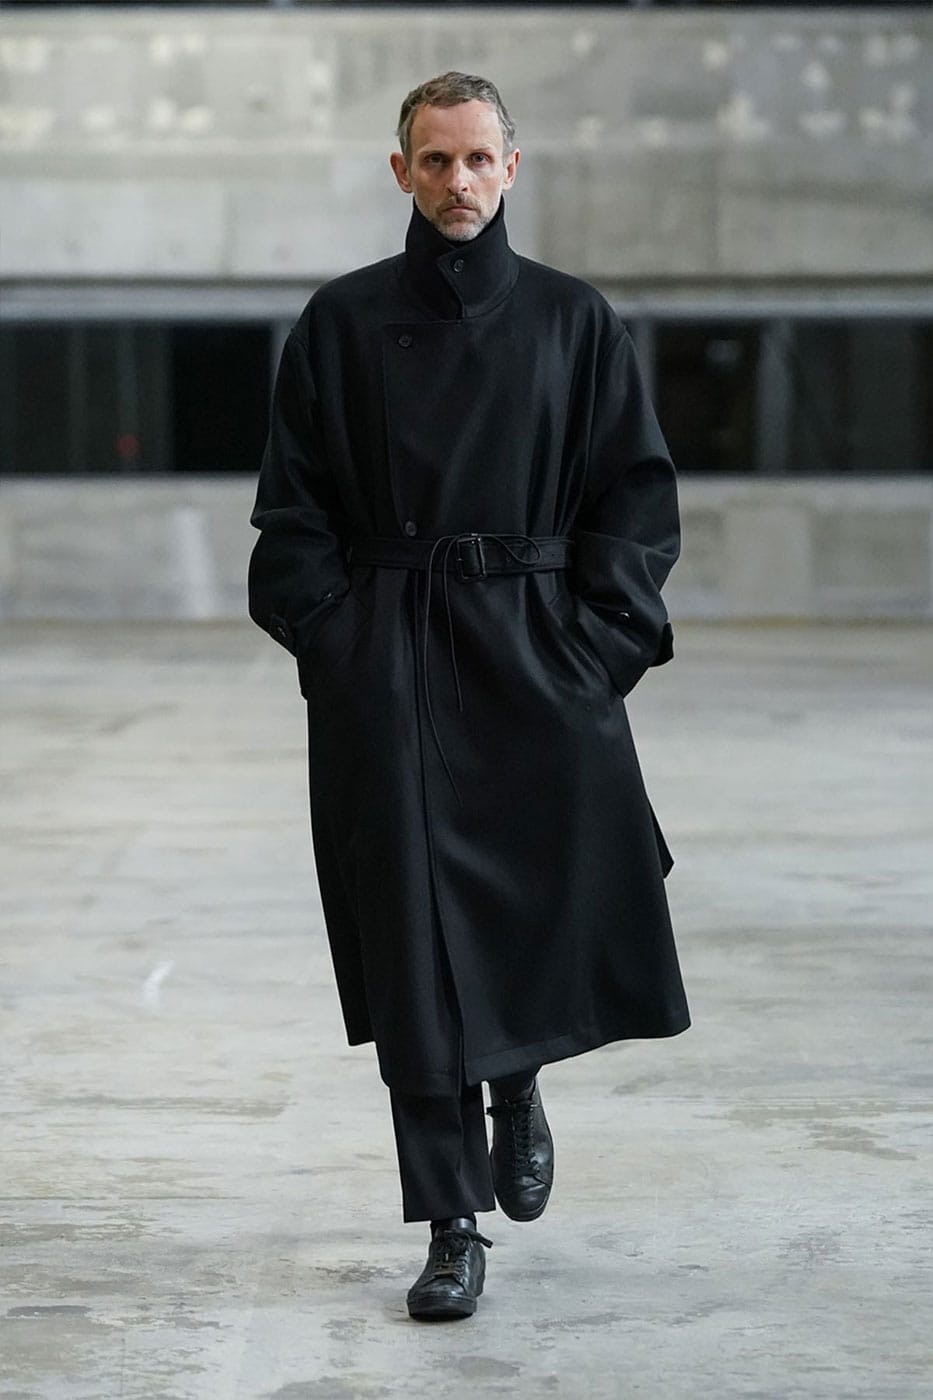 Stein Experiments With Layering Proportions For FW22 | Hypebeast